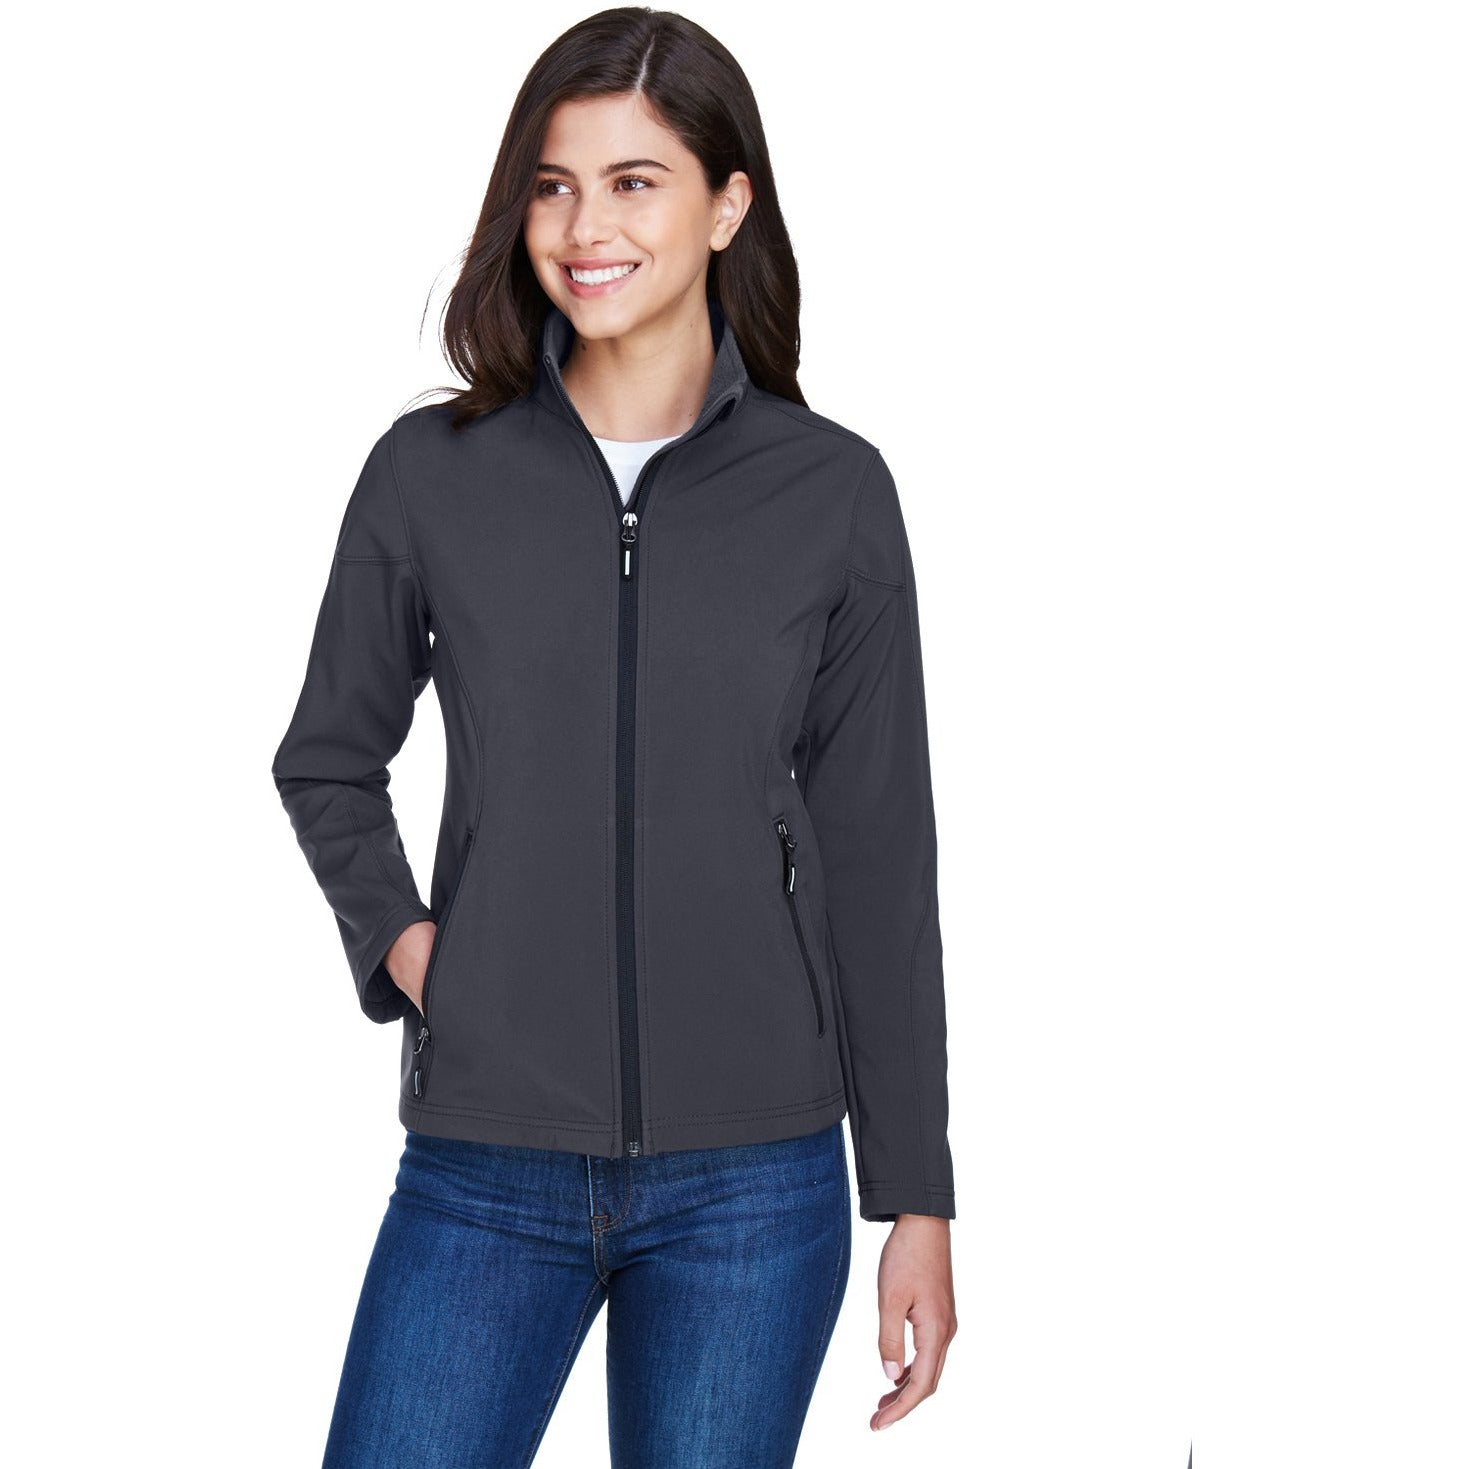 Ash City® Core 365 Ladies' Cruise Two-Layer Fleece Bonded Soft Shell Jacket